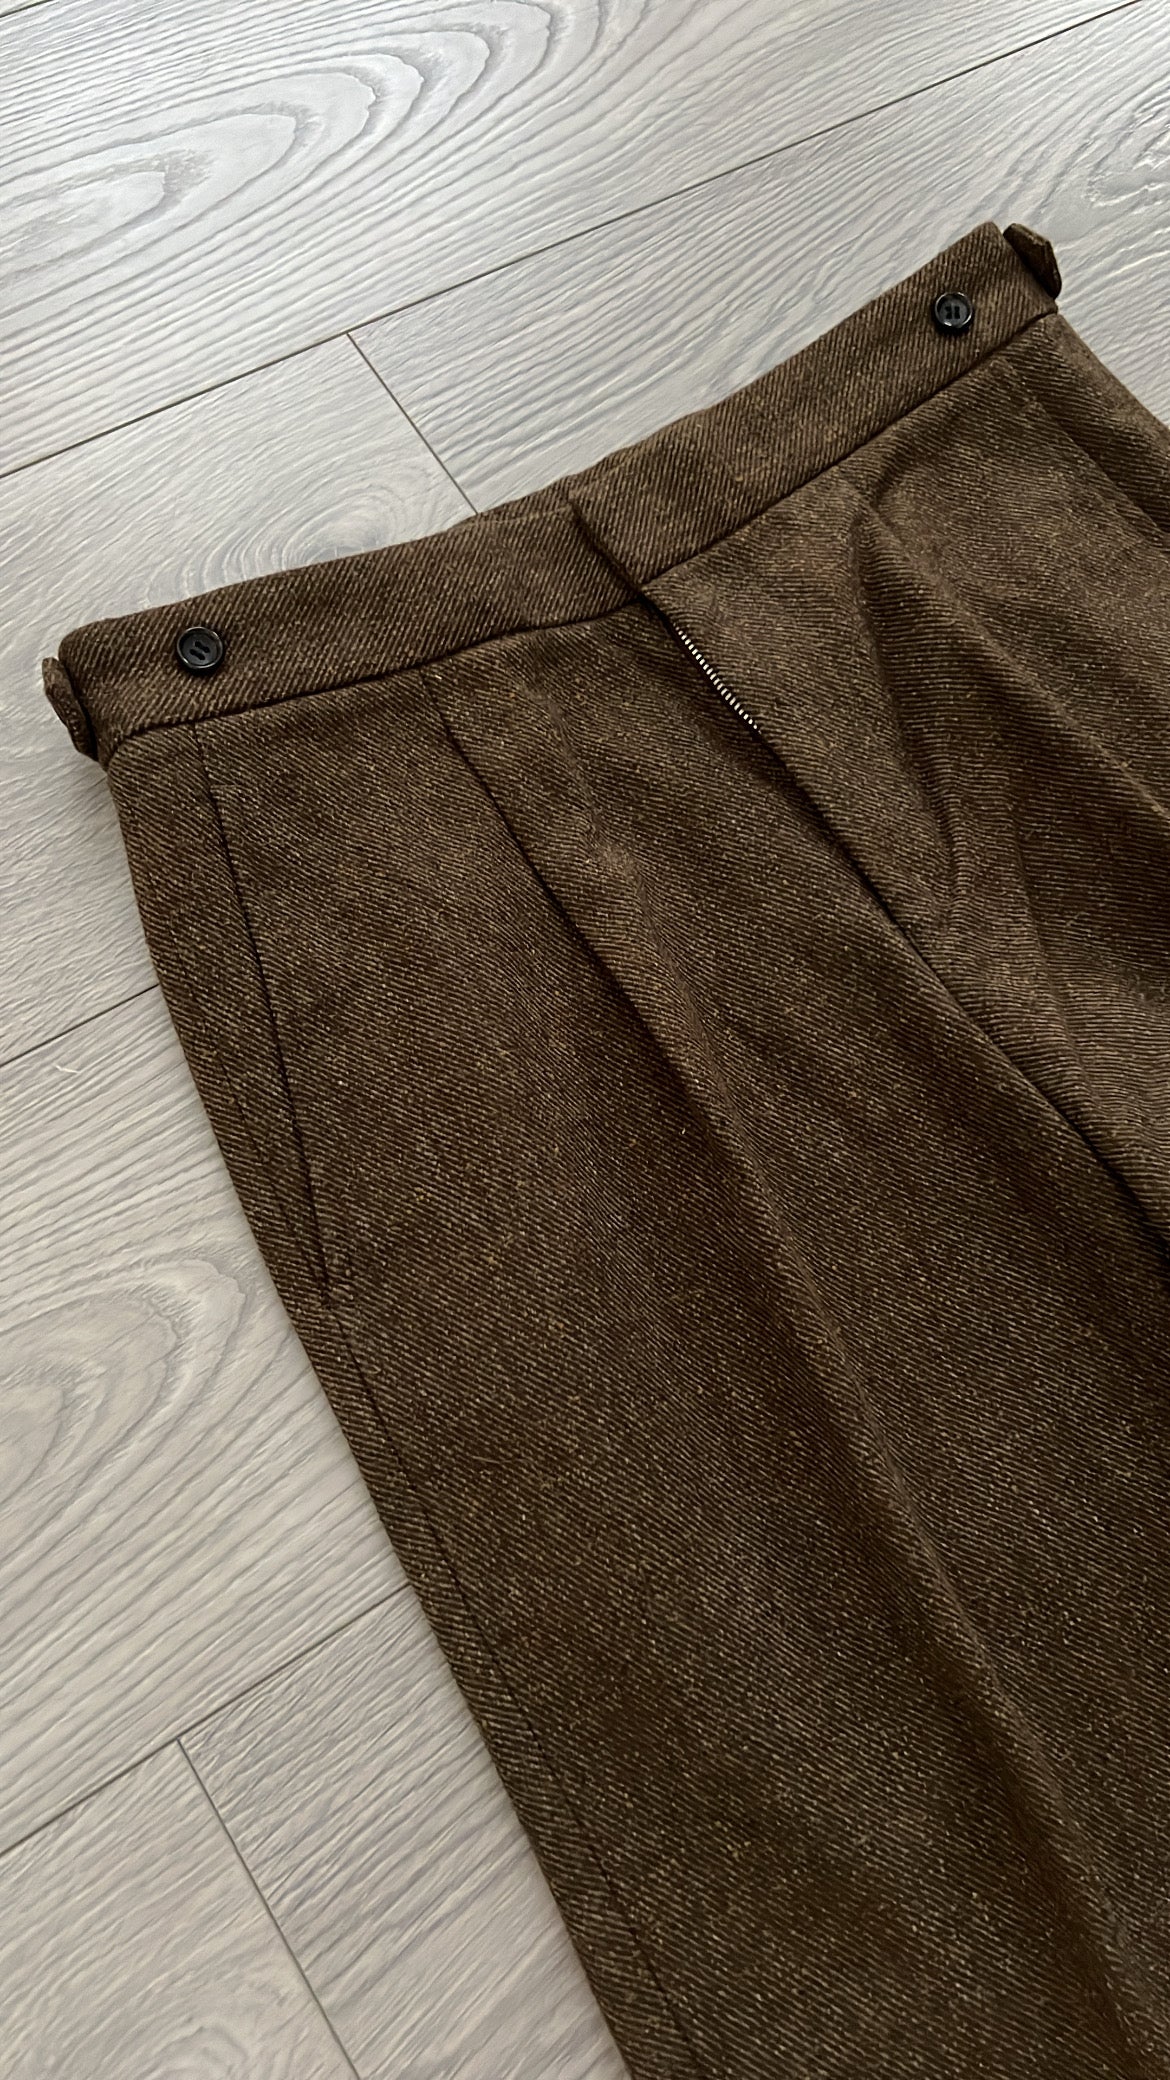 Comme Des Garcons Homme Plus 1990s Sample Pleated Wool Trousers - Size 30